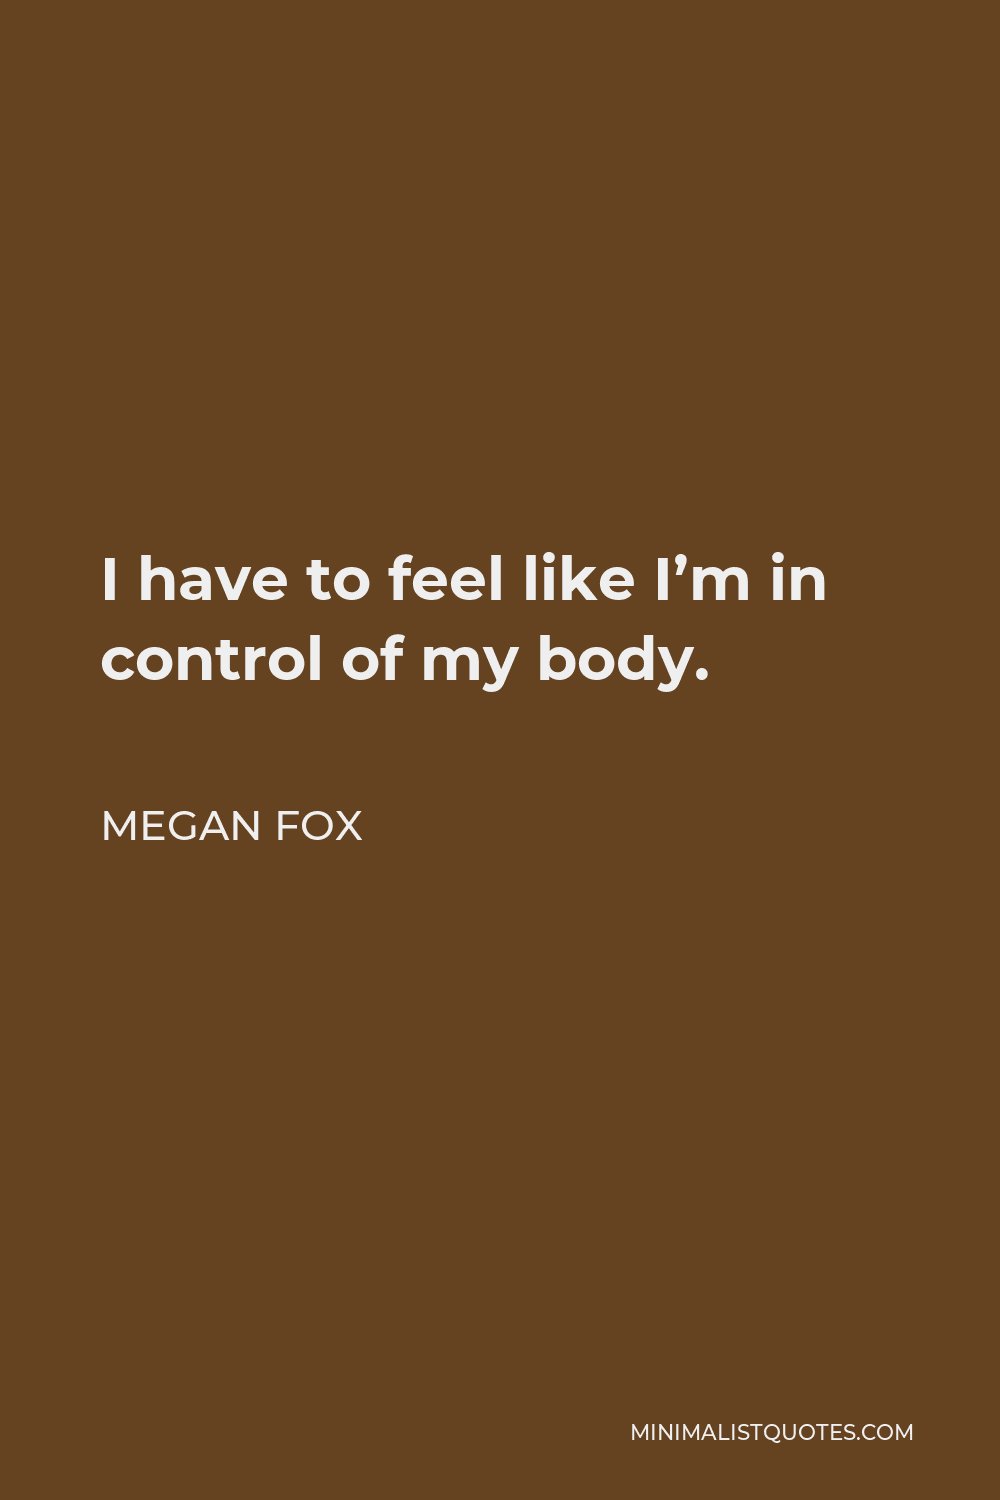 Megan Fox Quote - I have to feel like I’m in control of my body.